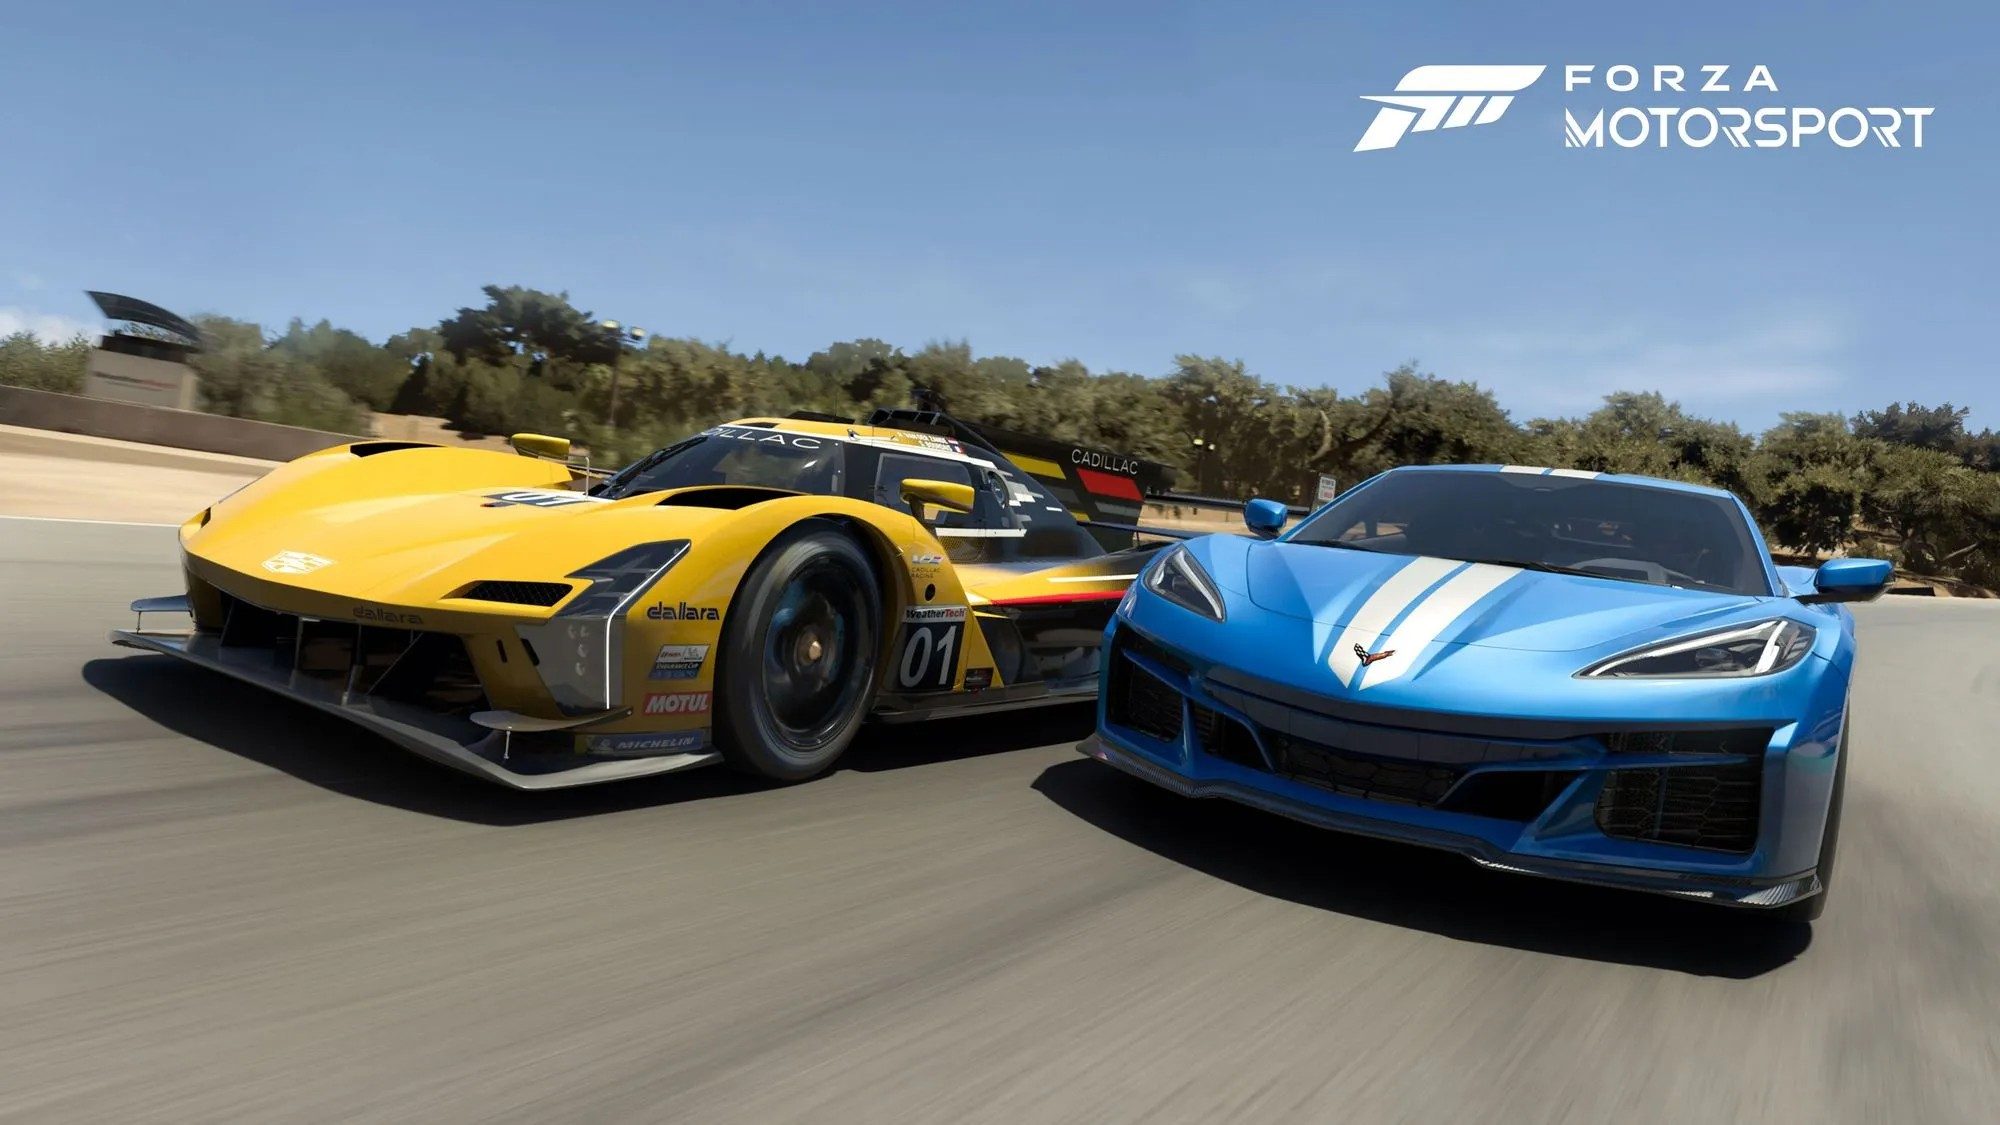 ‘Forza Motorsport’ quick review: A serious sim that’s newcomer-friendly